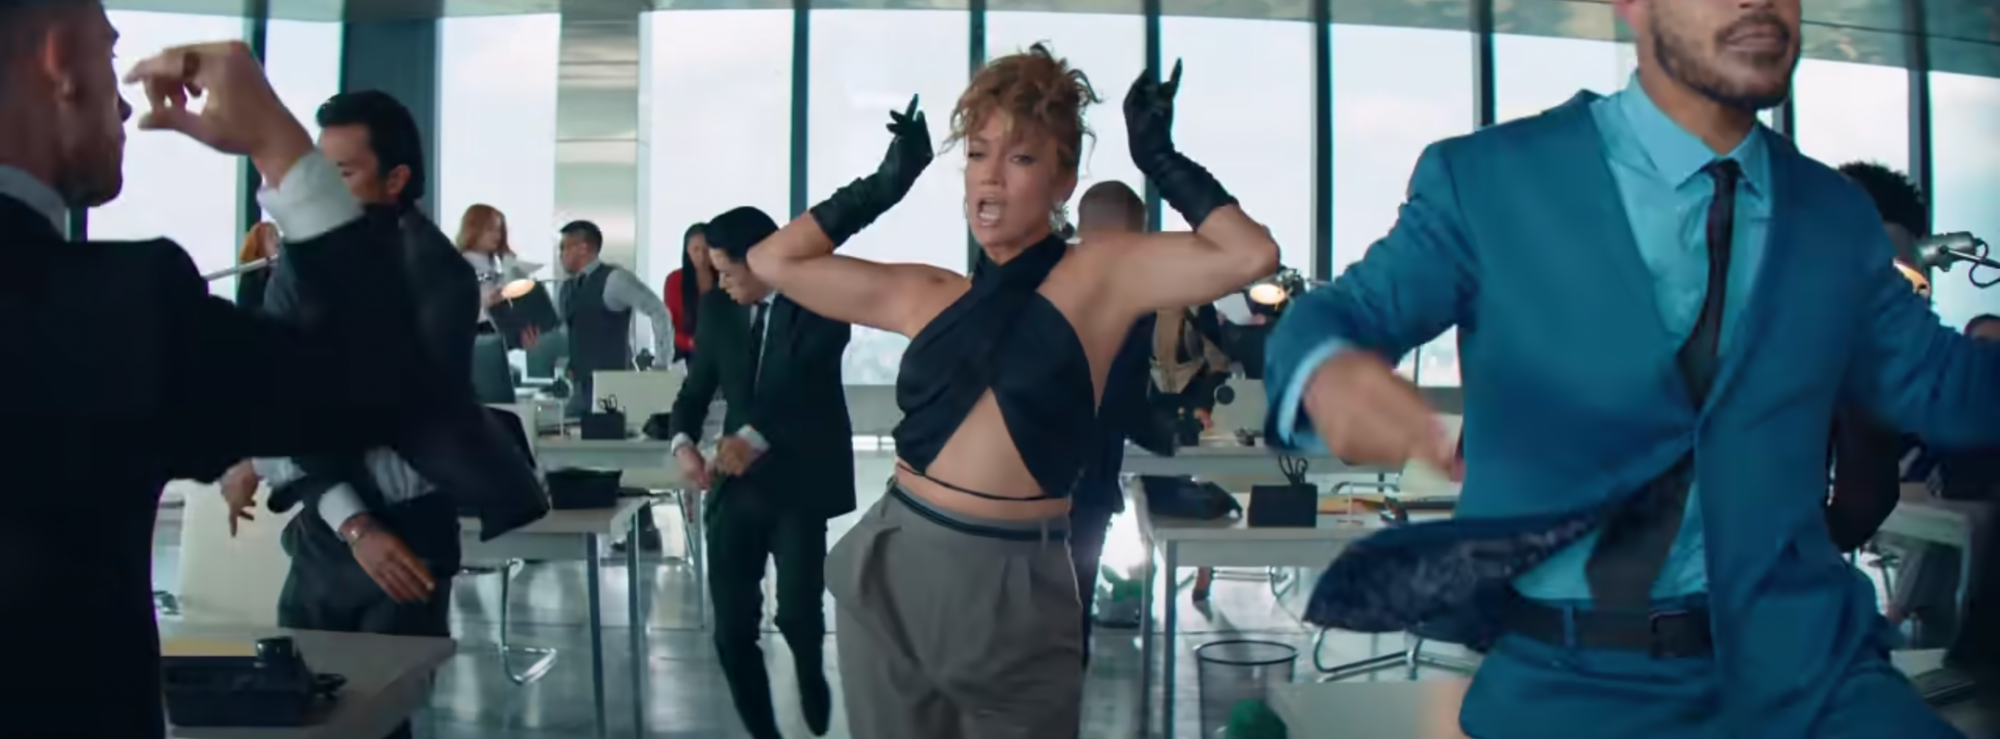 image of J.Lo in the office in a midriff-revealing halter top and leather gloves